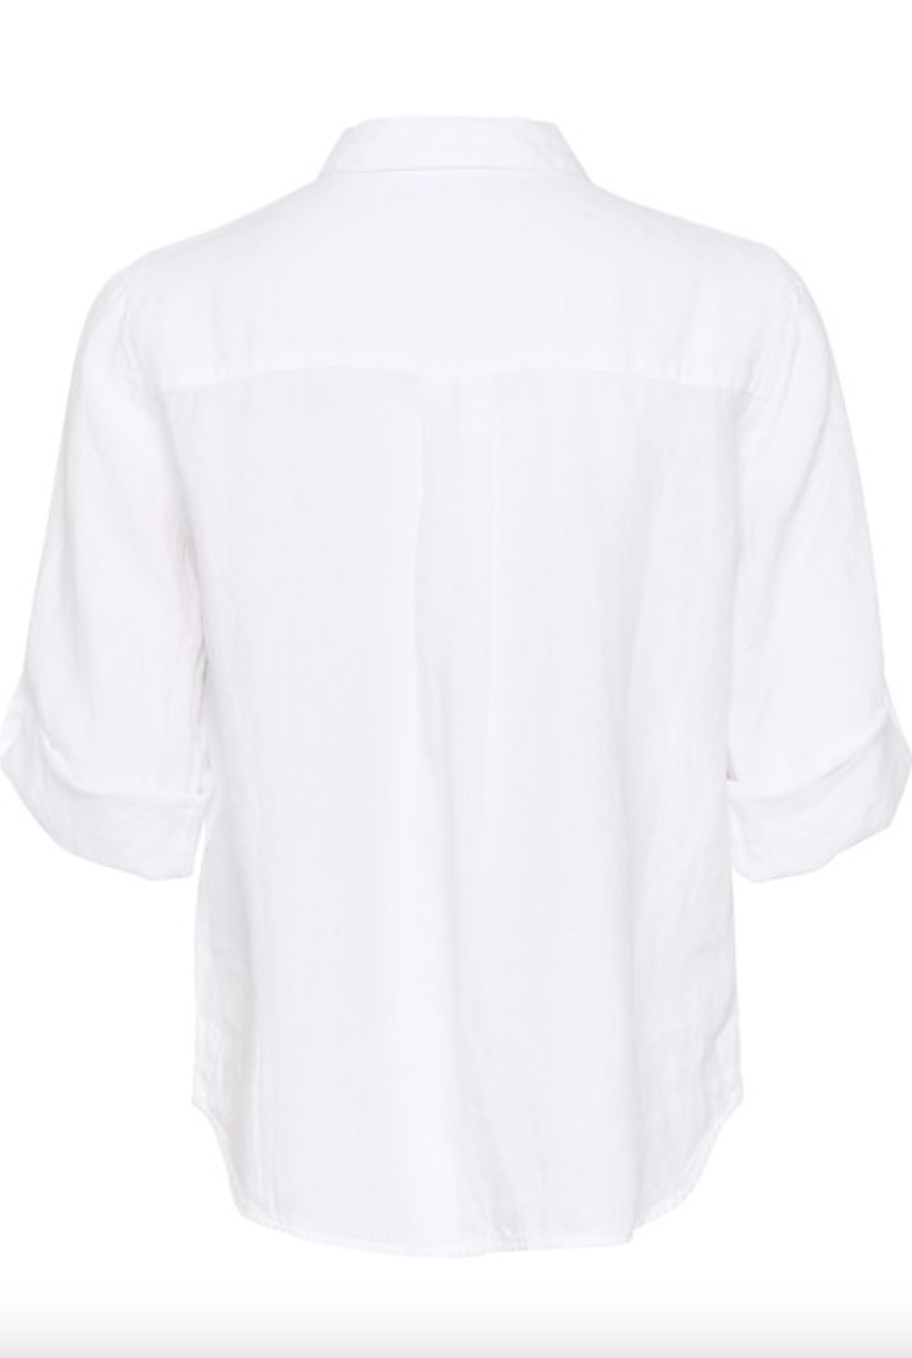 Part Two Cindie linen shirt bright white